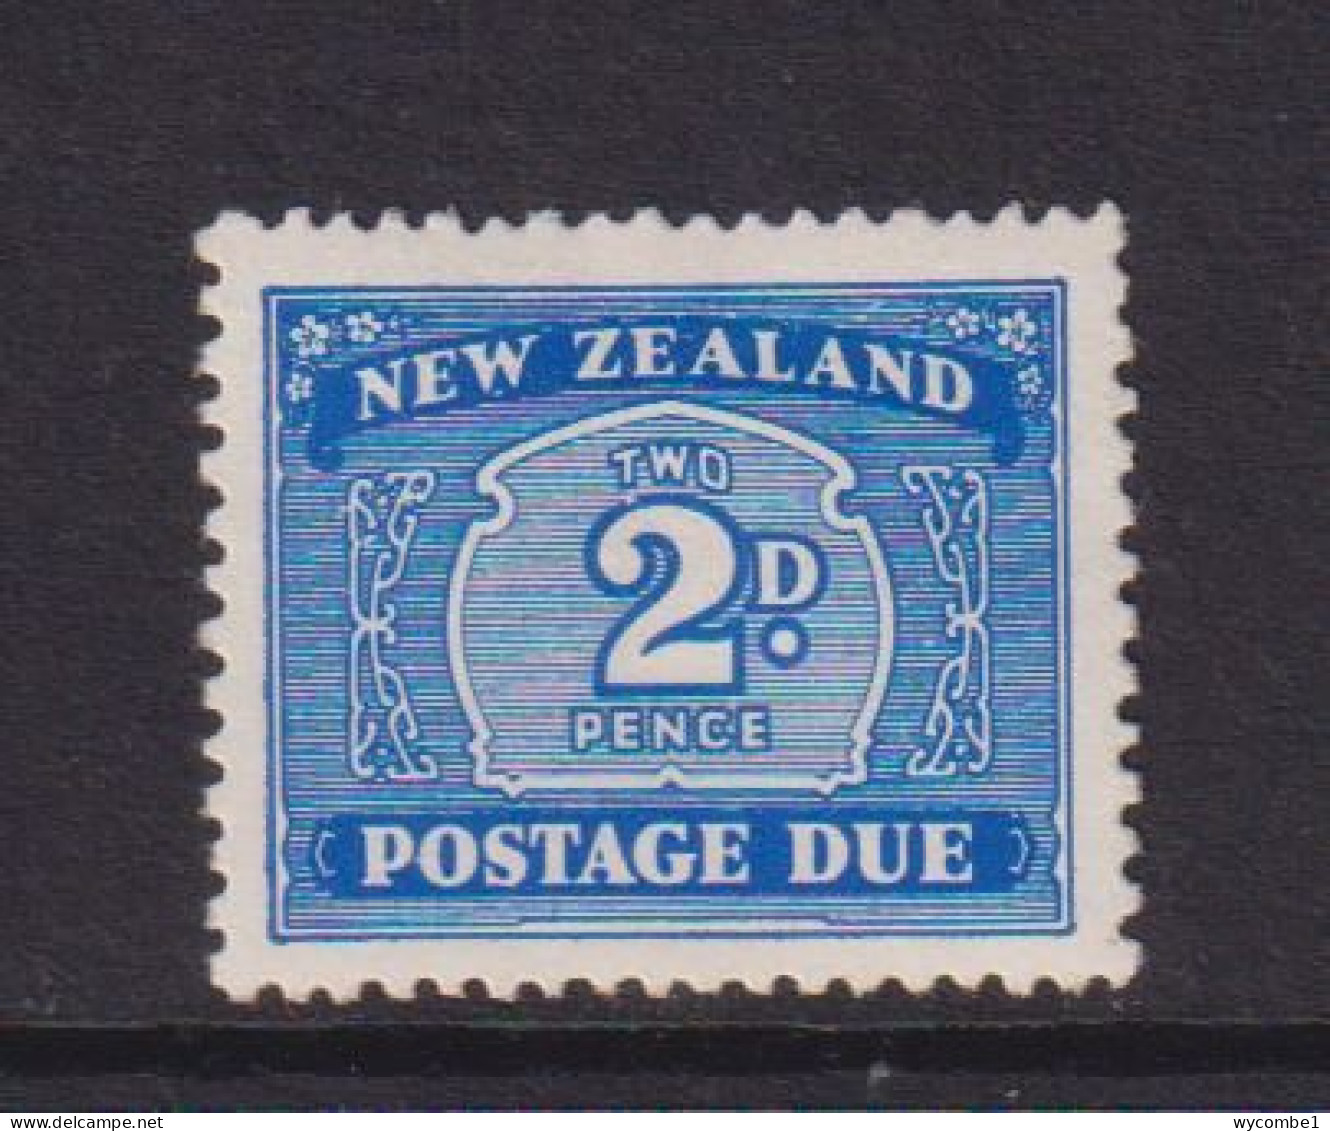 NEW ZEALAND  - 1939 Postage Due 2d Hinged Mint - Postage Due